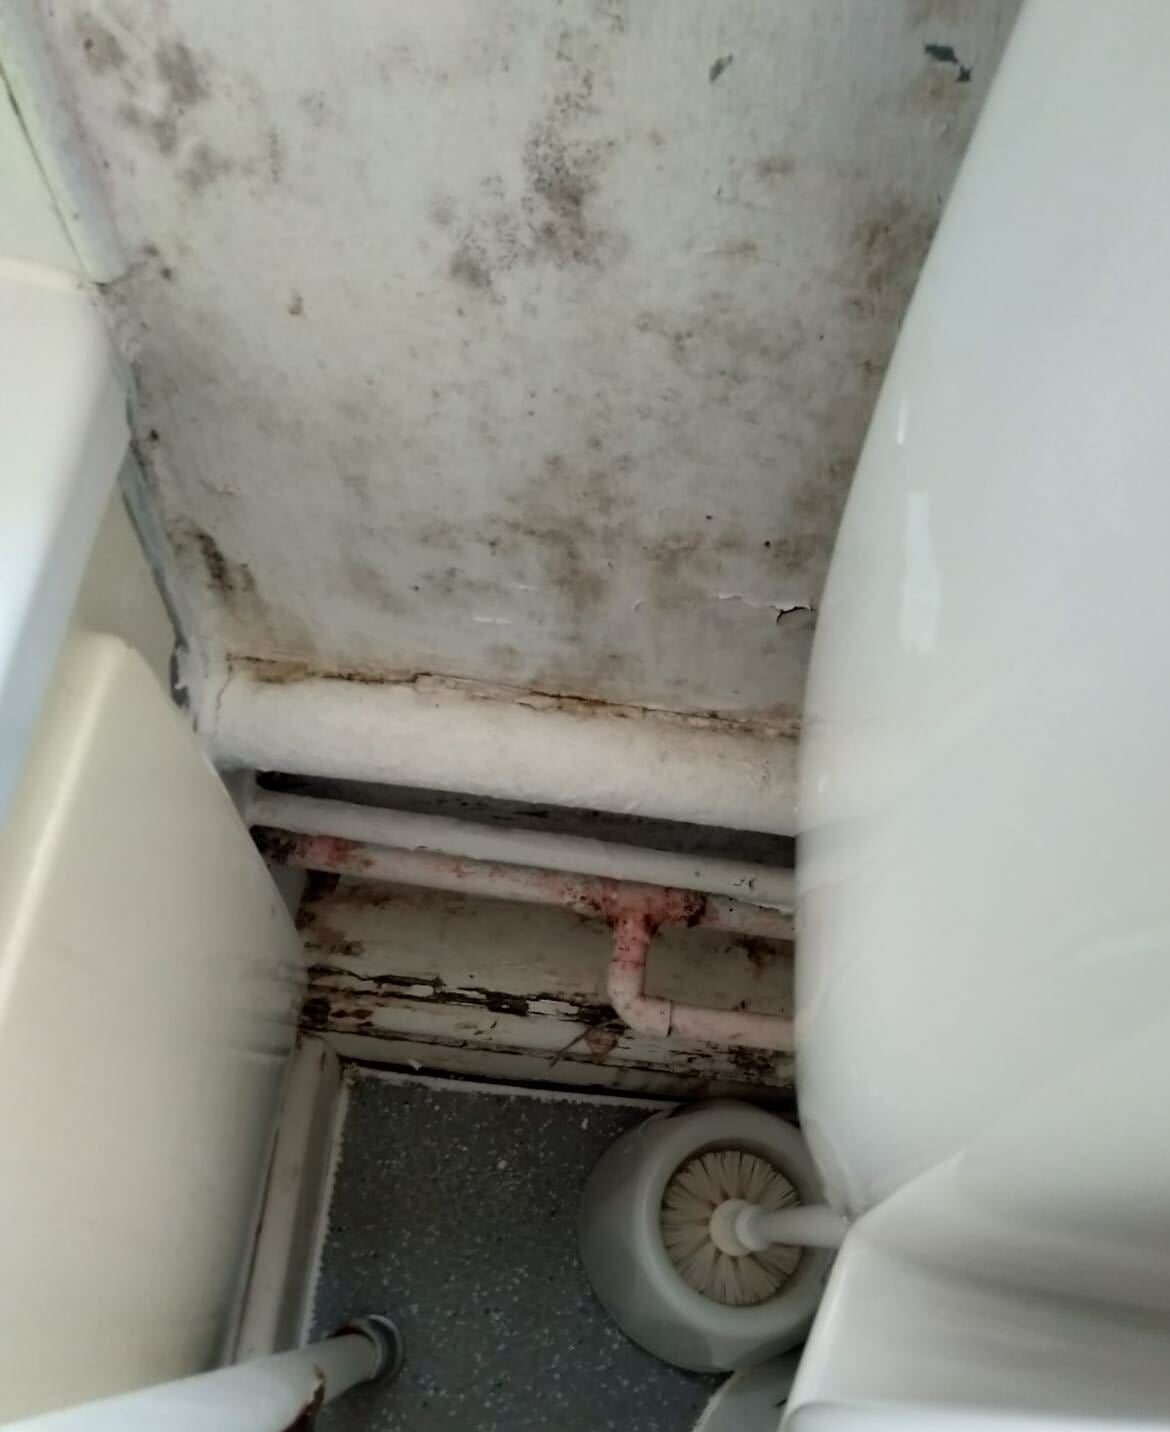 The tenants say the mould would return after treatment, each time worse than before